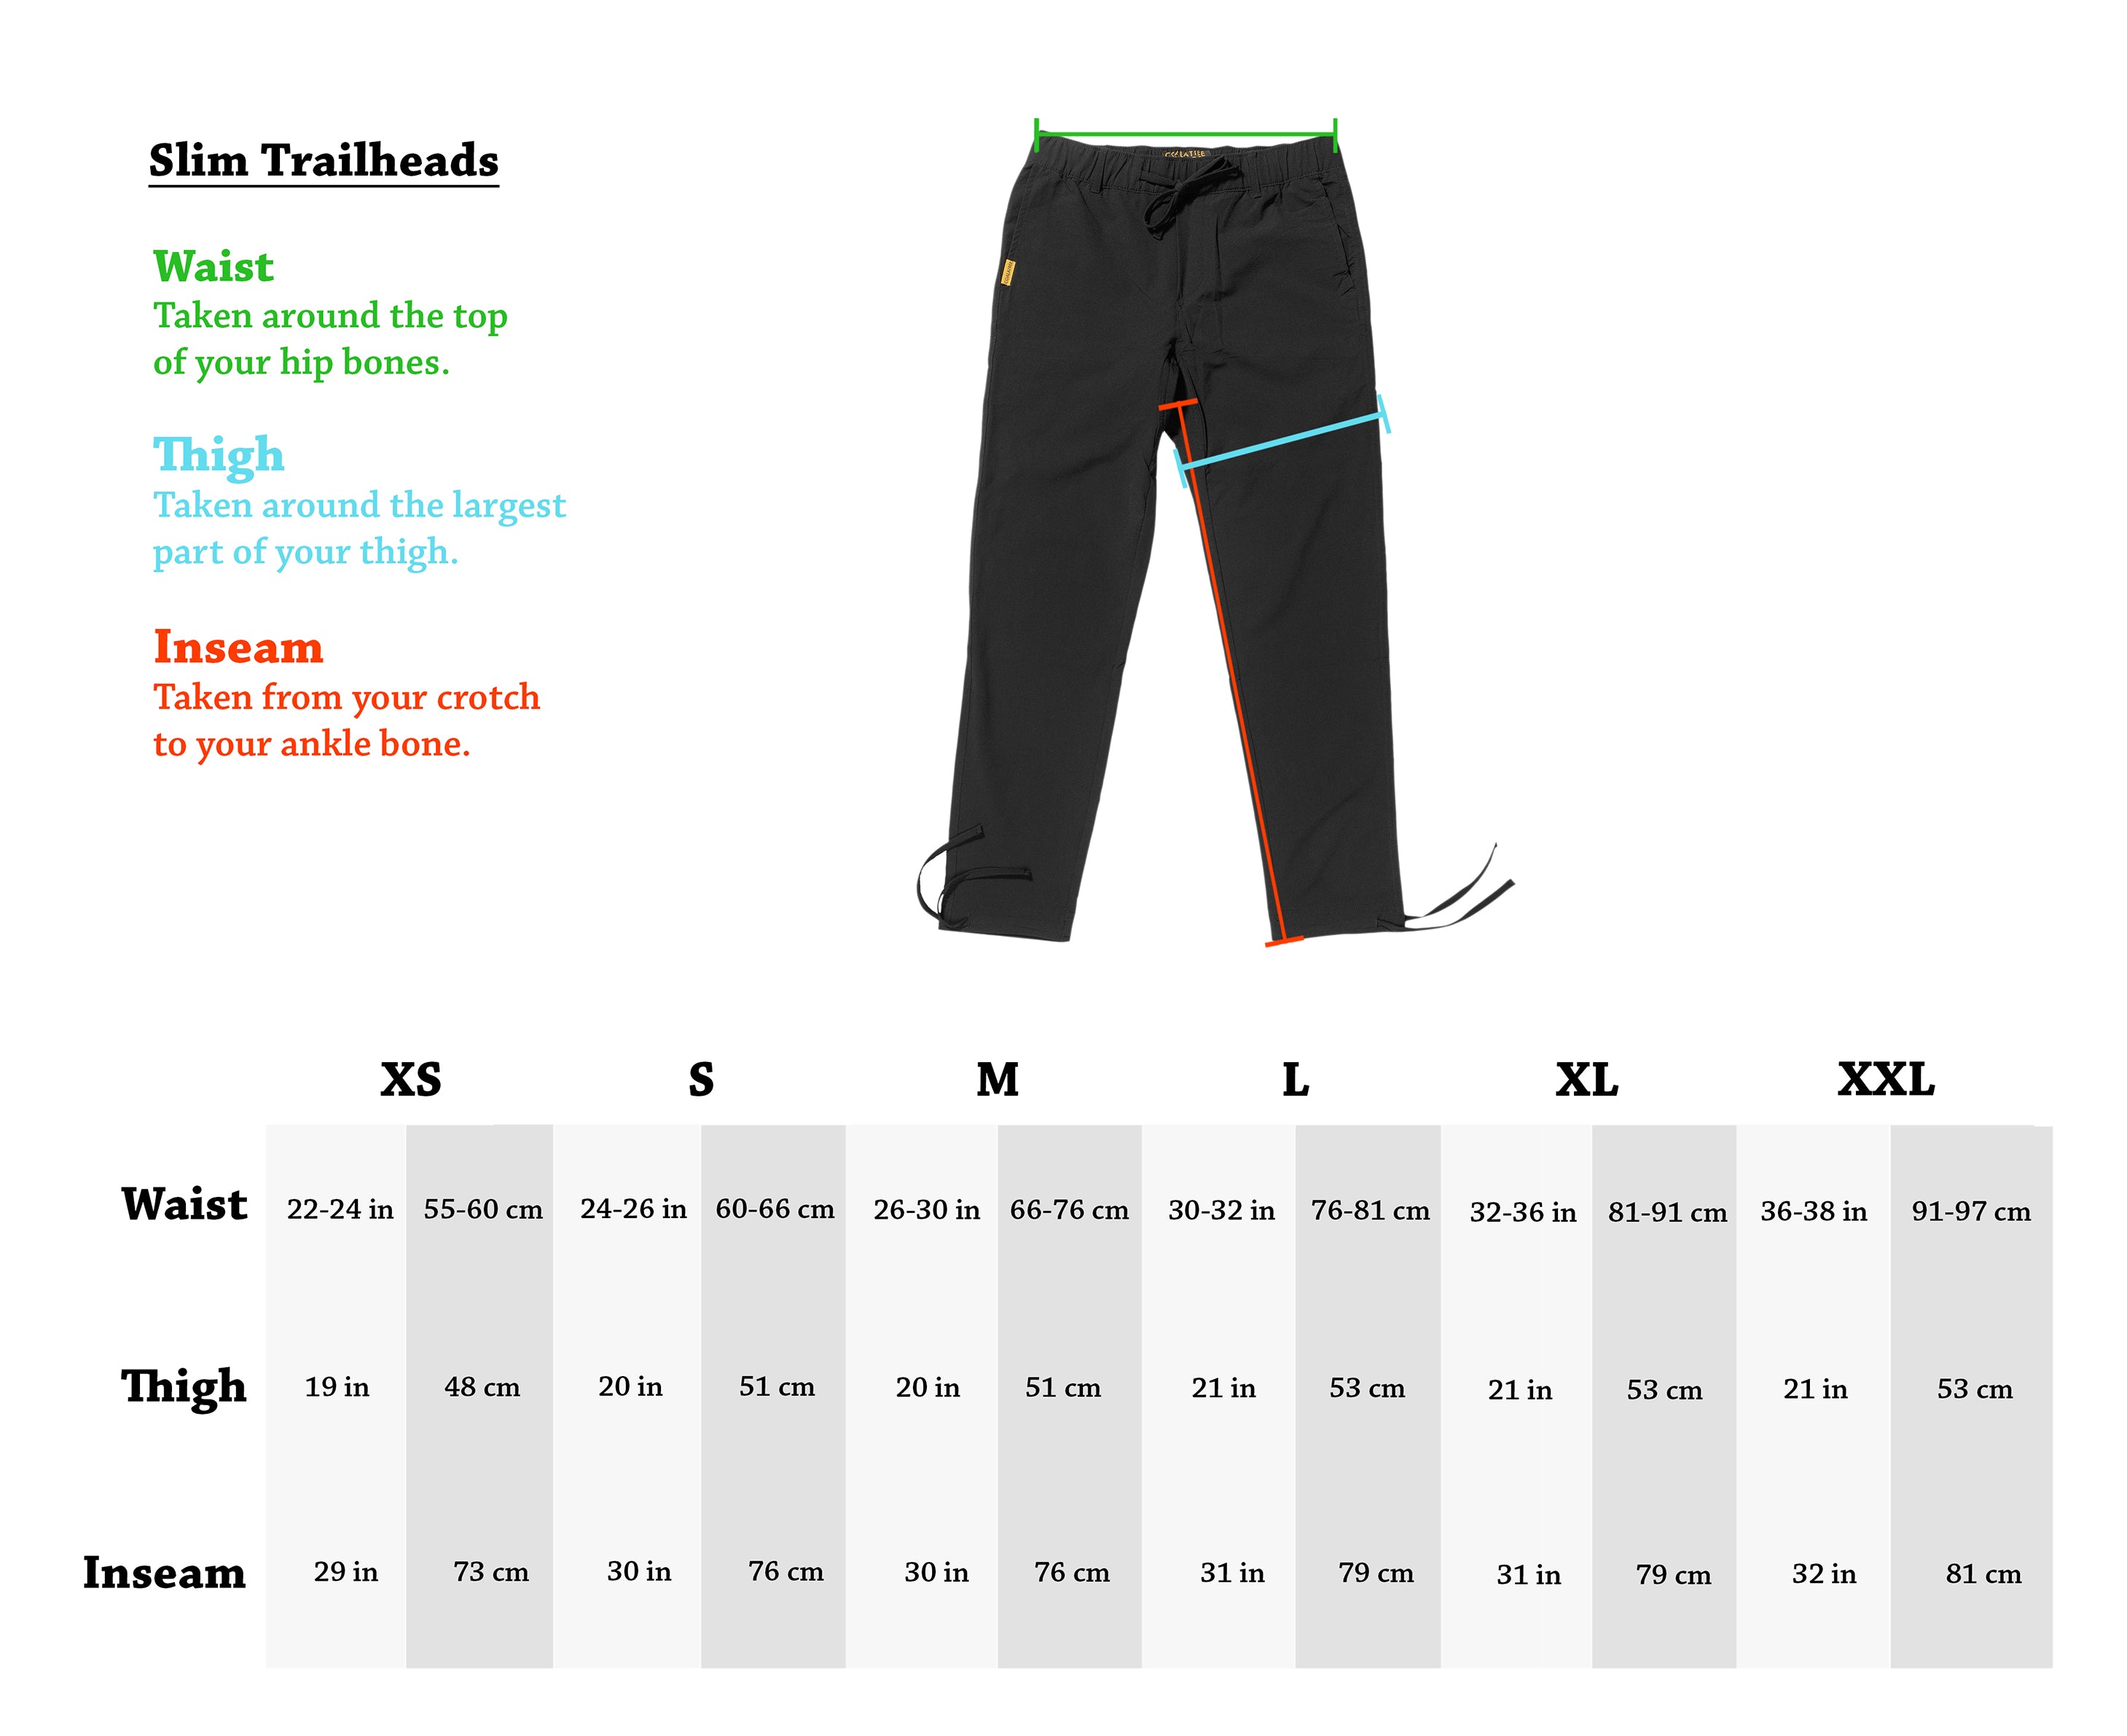 The Manual Features Our Pick-Pocket Proof Adventure Travel Pants